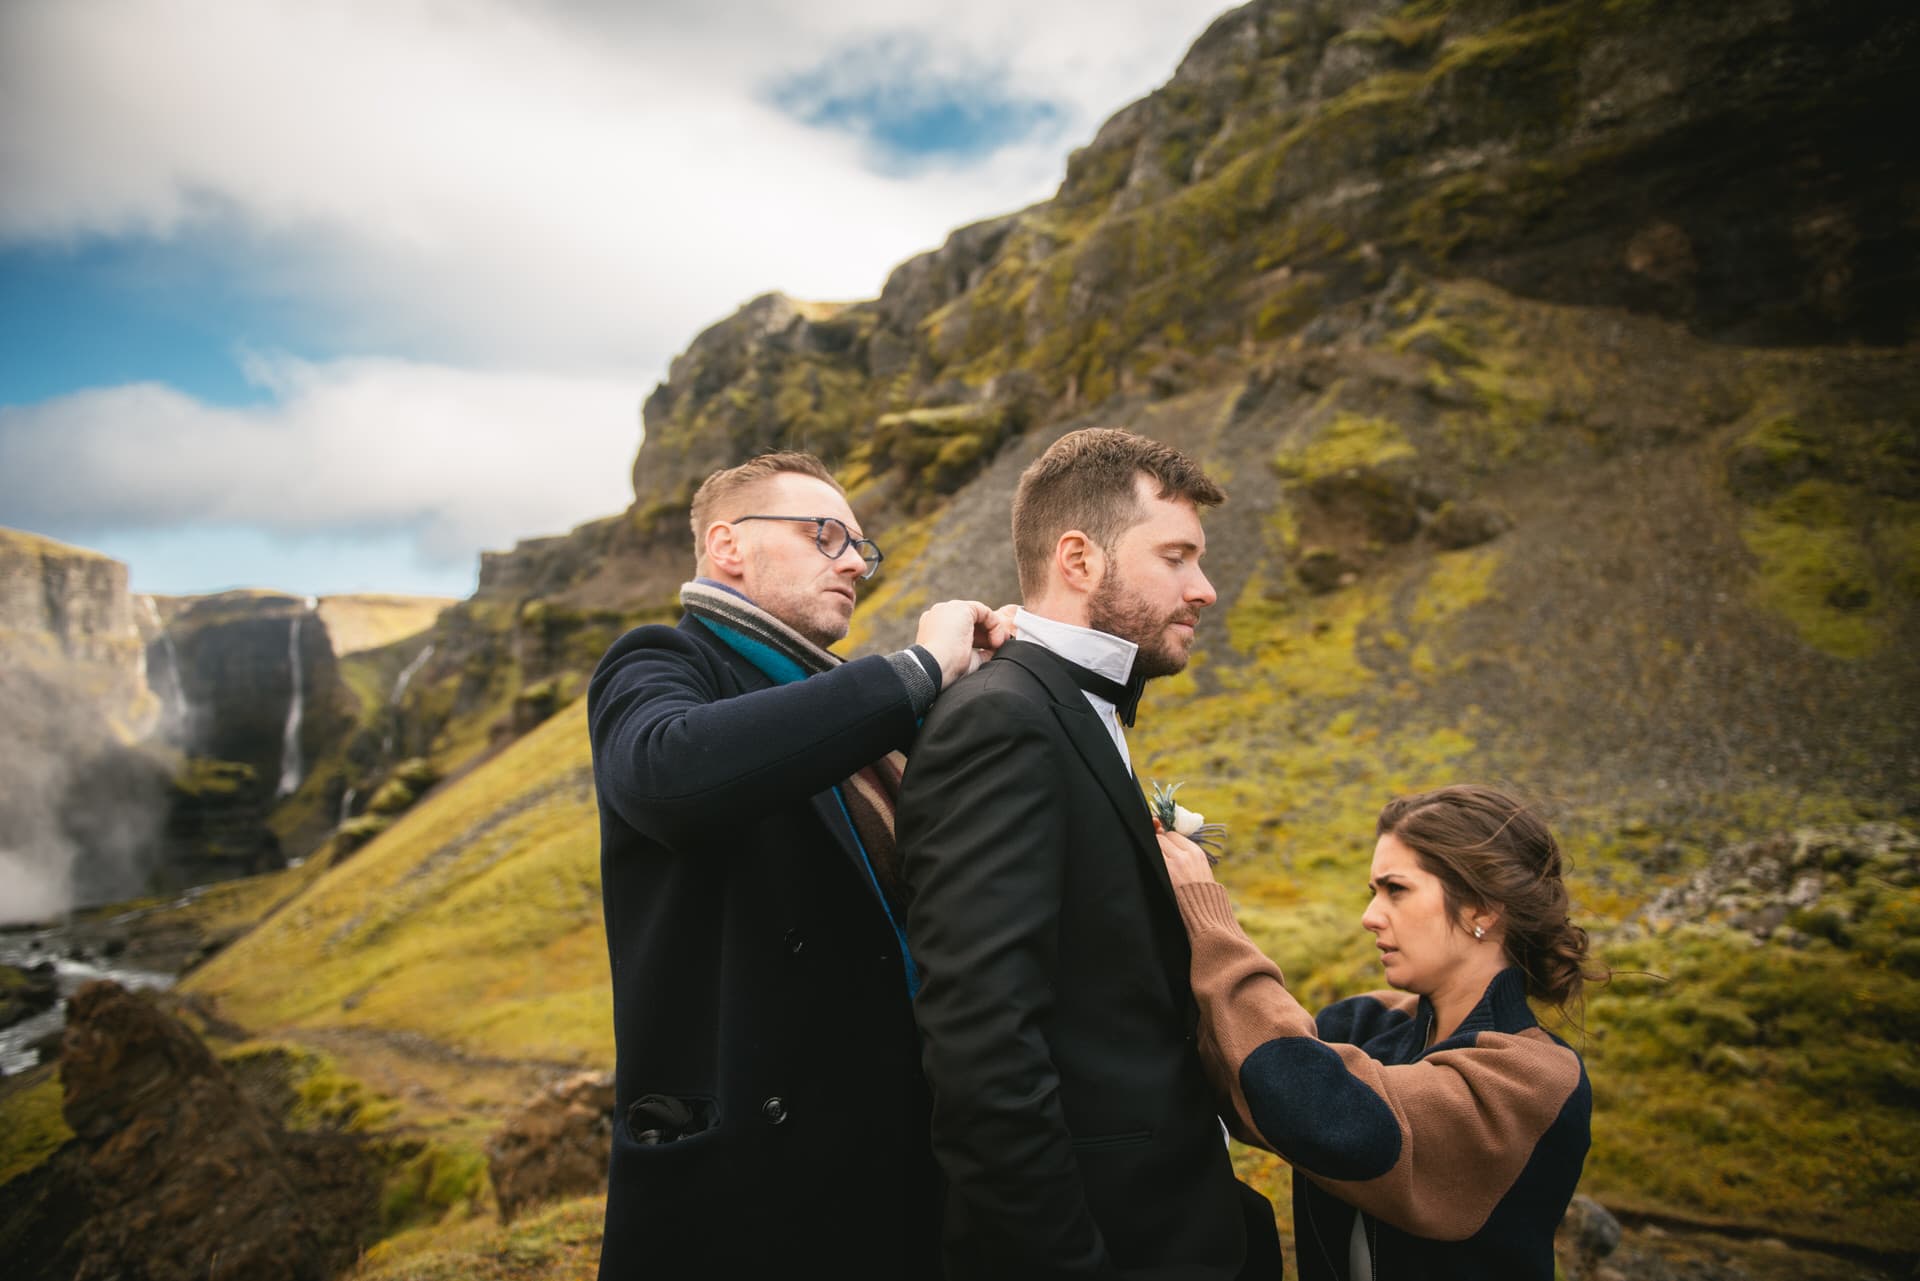 Groom getting the final touches on his suits on their elopement day in Iceland